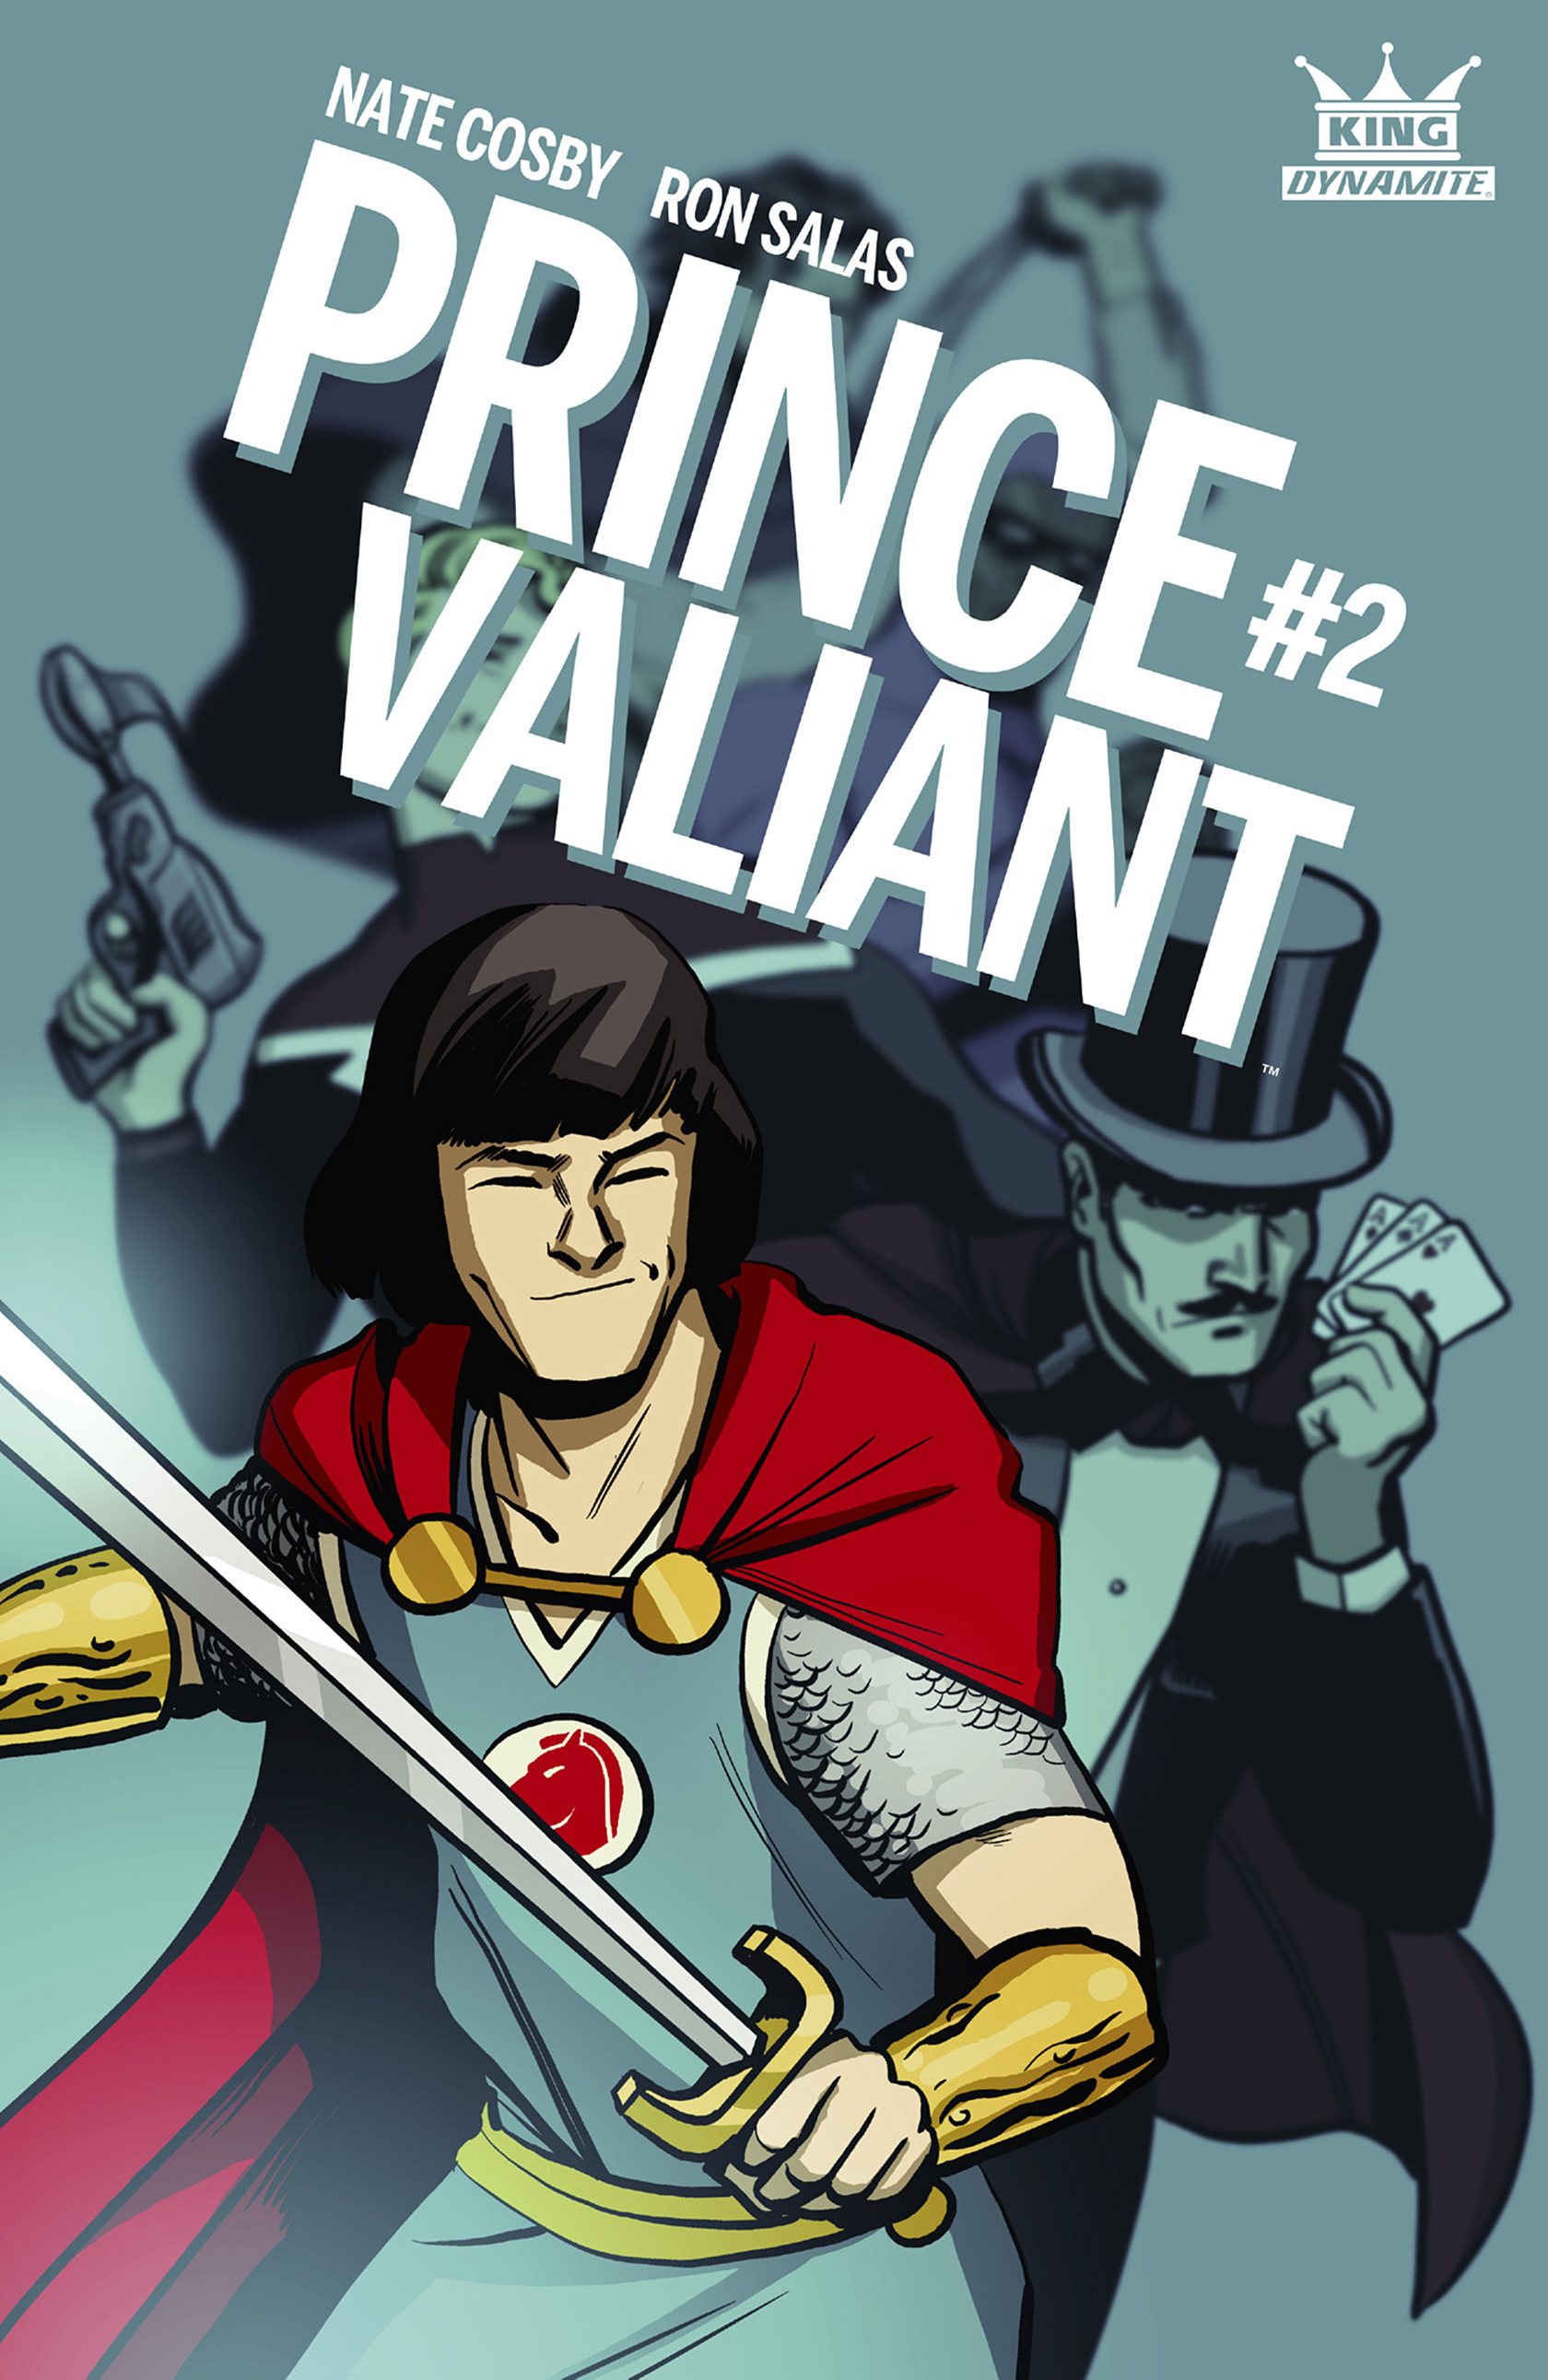 Read online King: Prince Valiant comic -  Issue #2 - 1